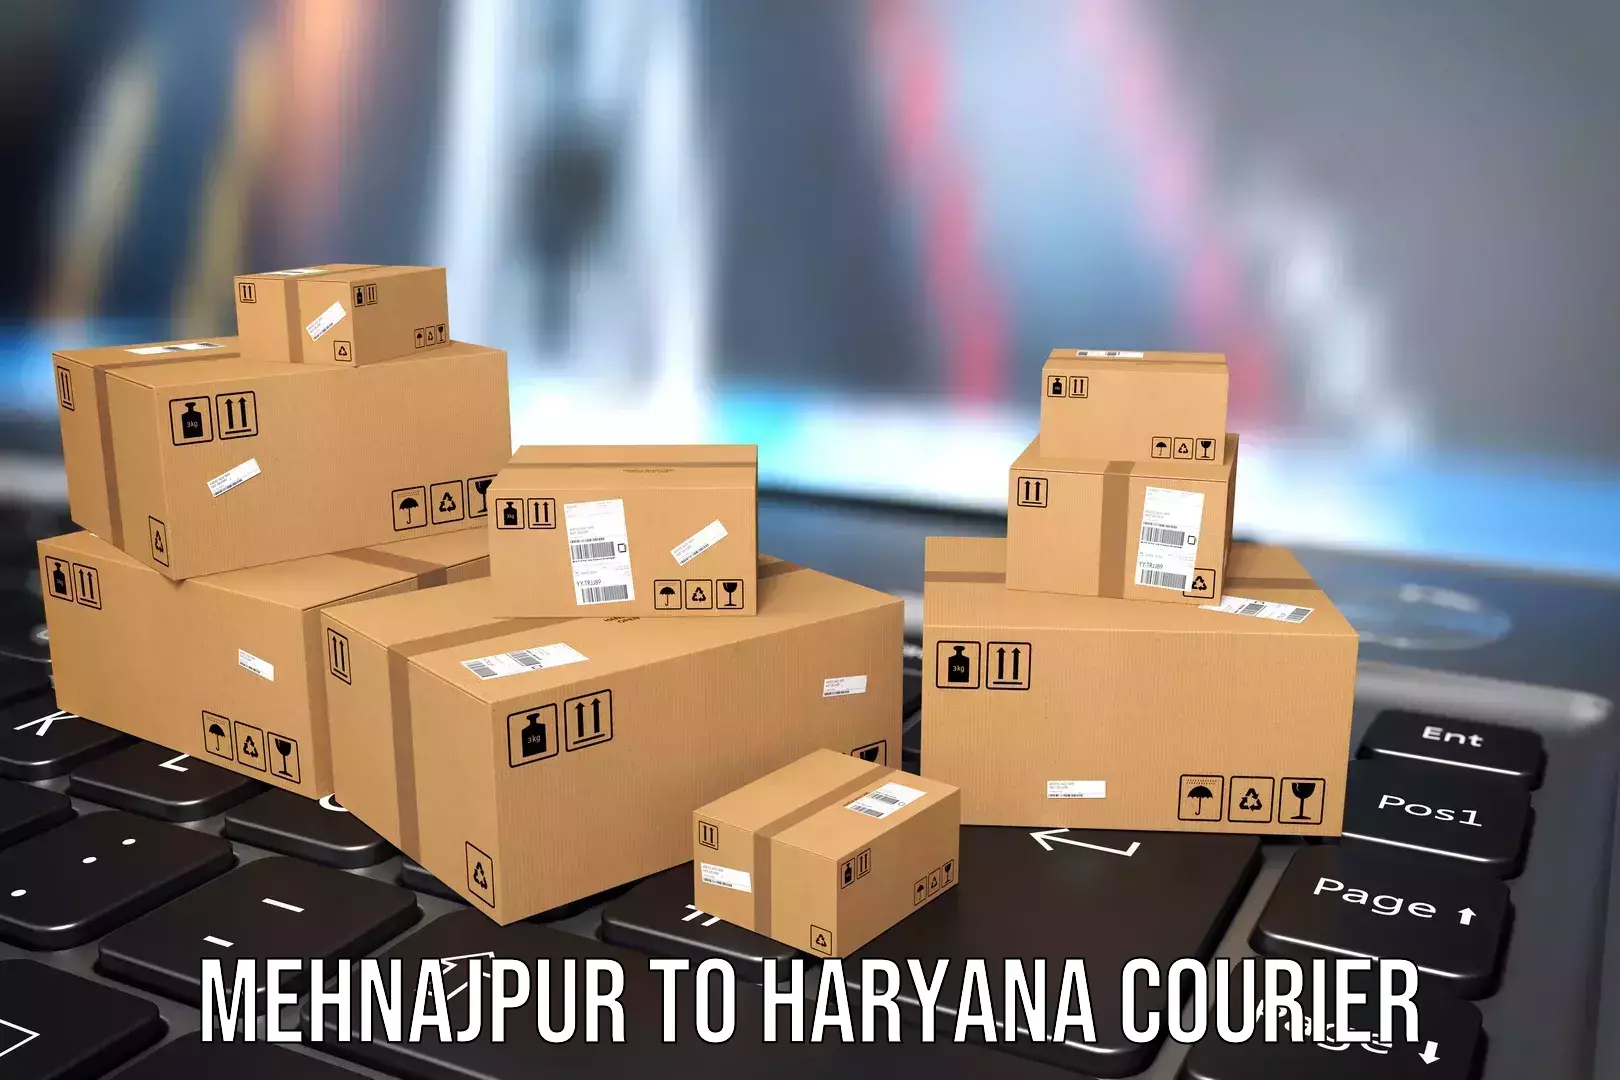 Luggage transport solutions Mehnajpur to Chaudhary Charan Singh Haryana Agricultural University Hisar